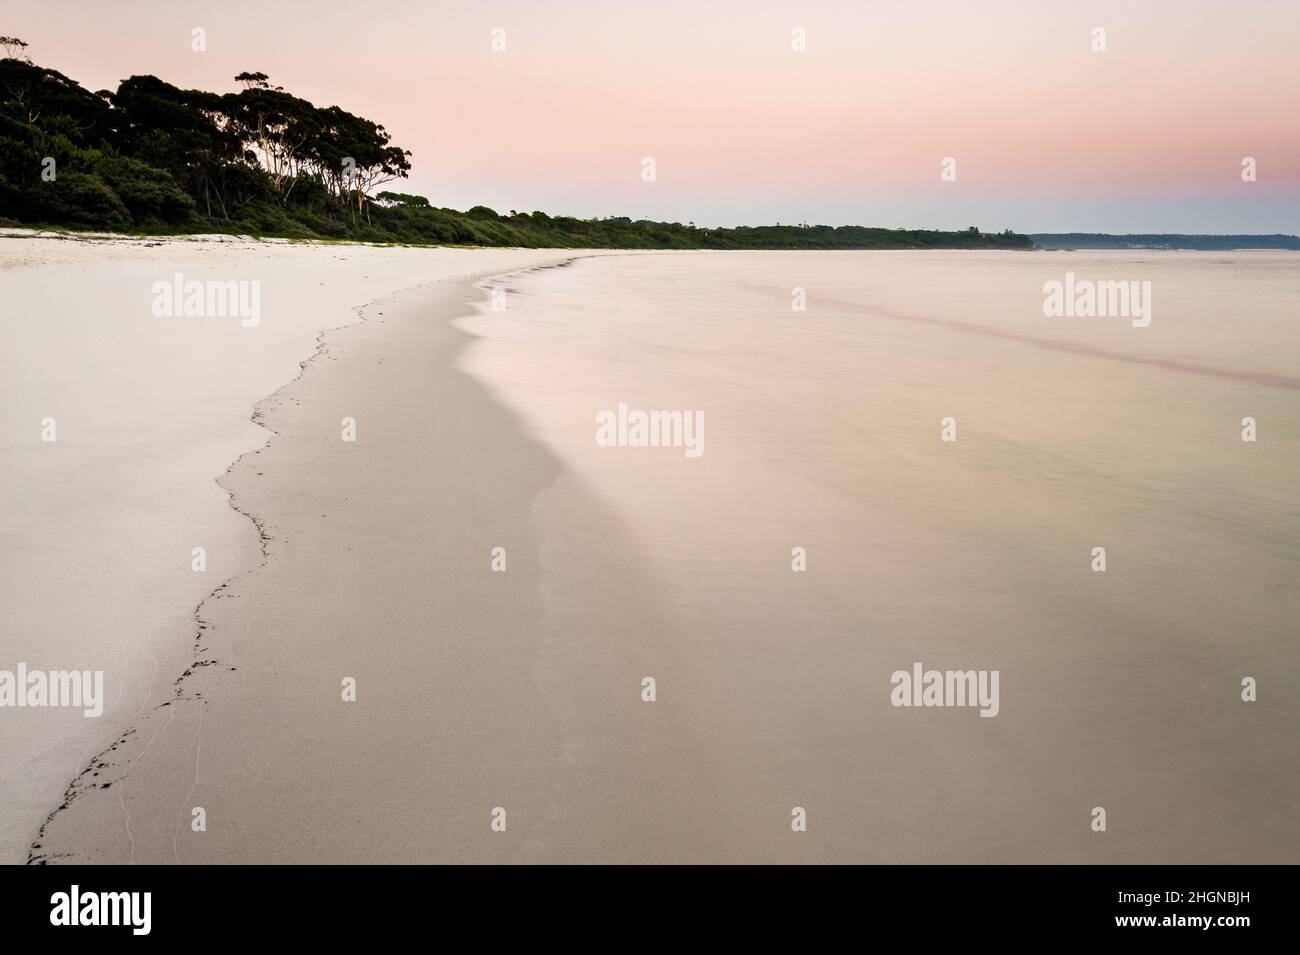 A new days is dawning in Jervis Bay. Stock Photo